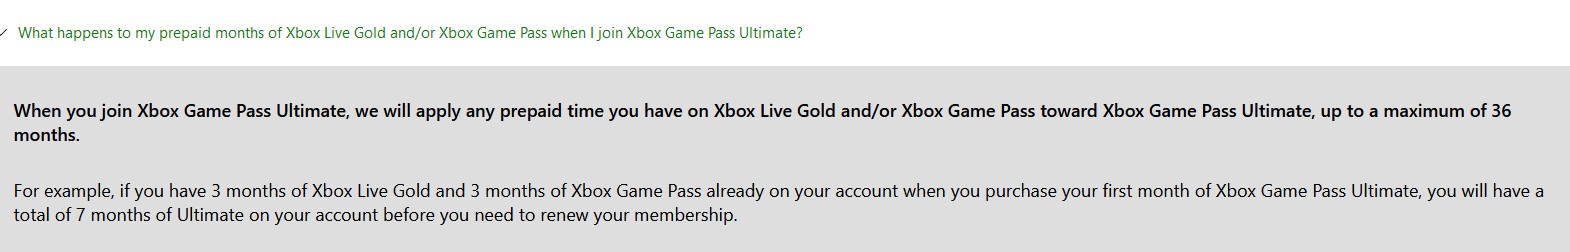 upgrading xbox gold to ultimate